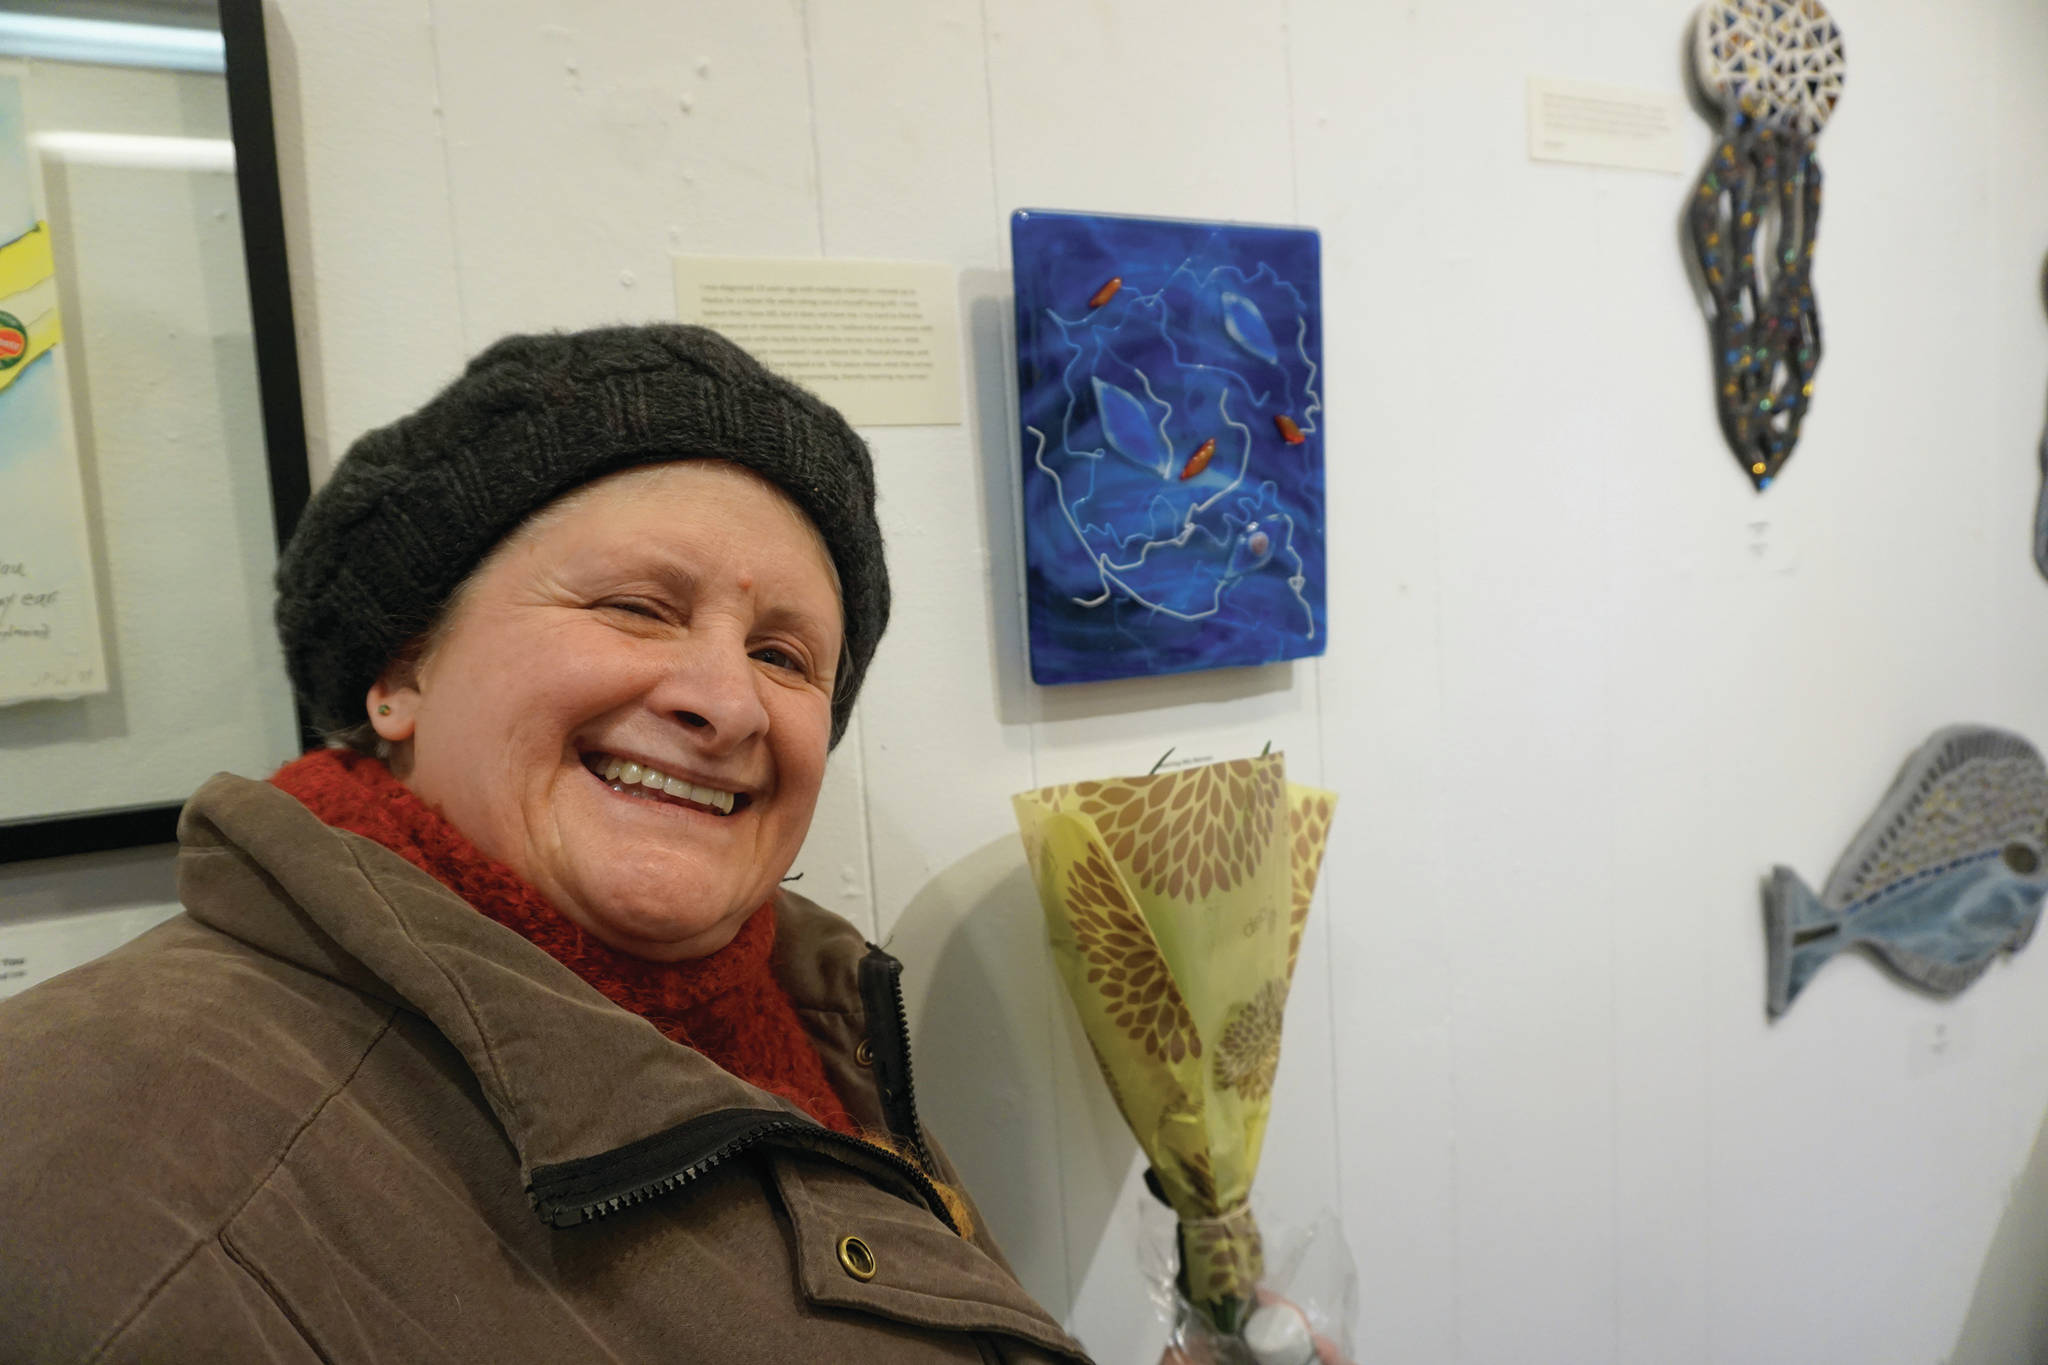 Cindy Nelson stands by her art on March 6, 2020, at the Disability Art Show at the Homer Council on the Arts in Homer, Alaska. (Photo by Michael Armstrong/Homer News)